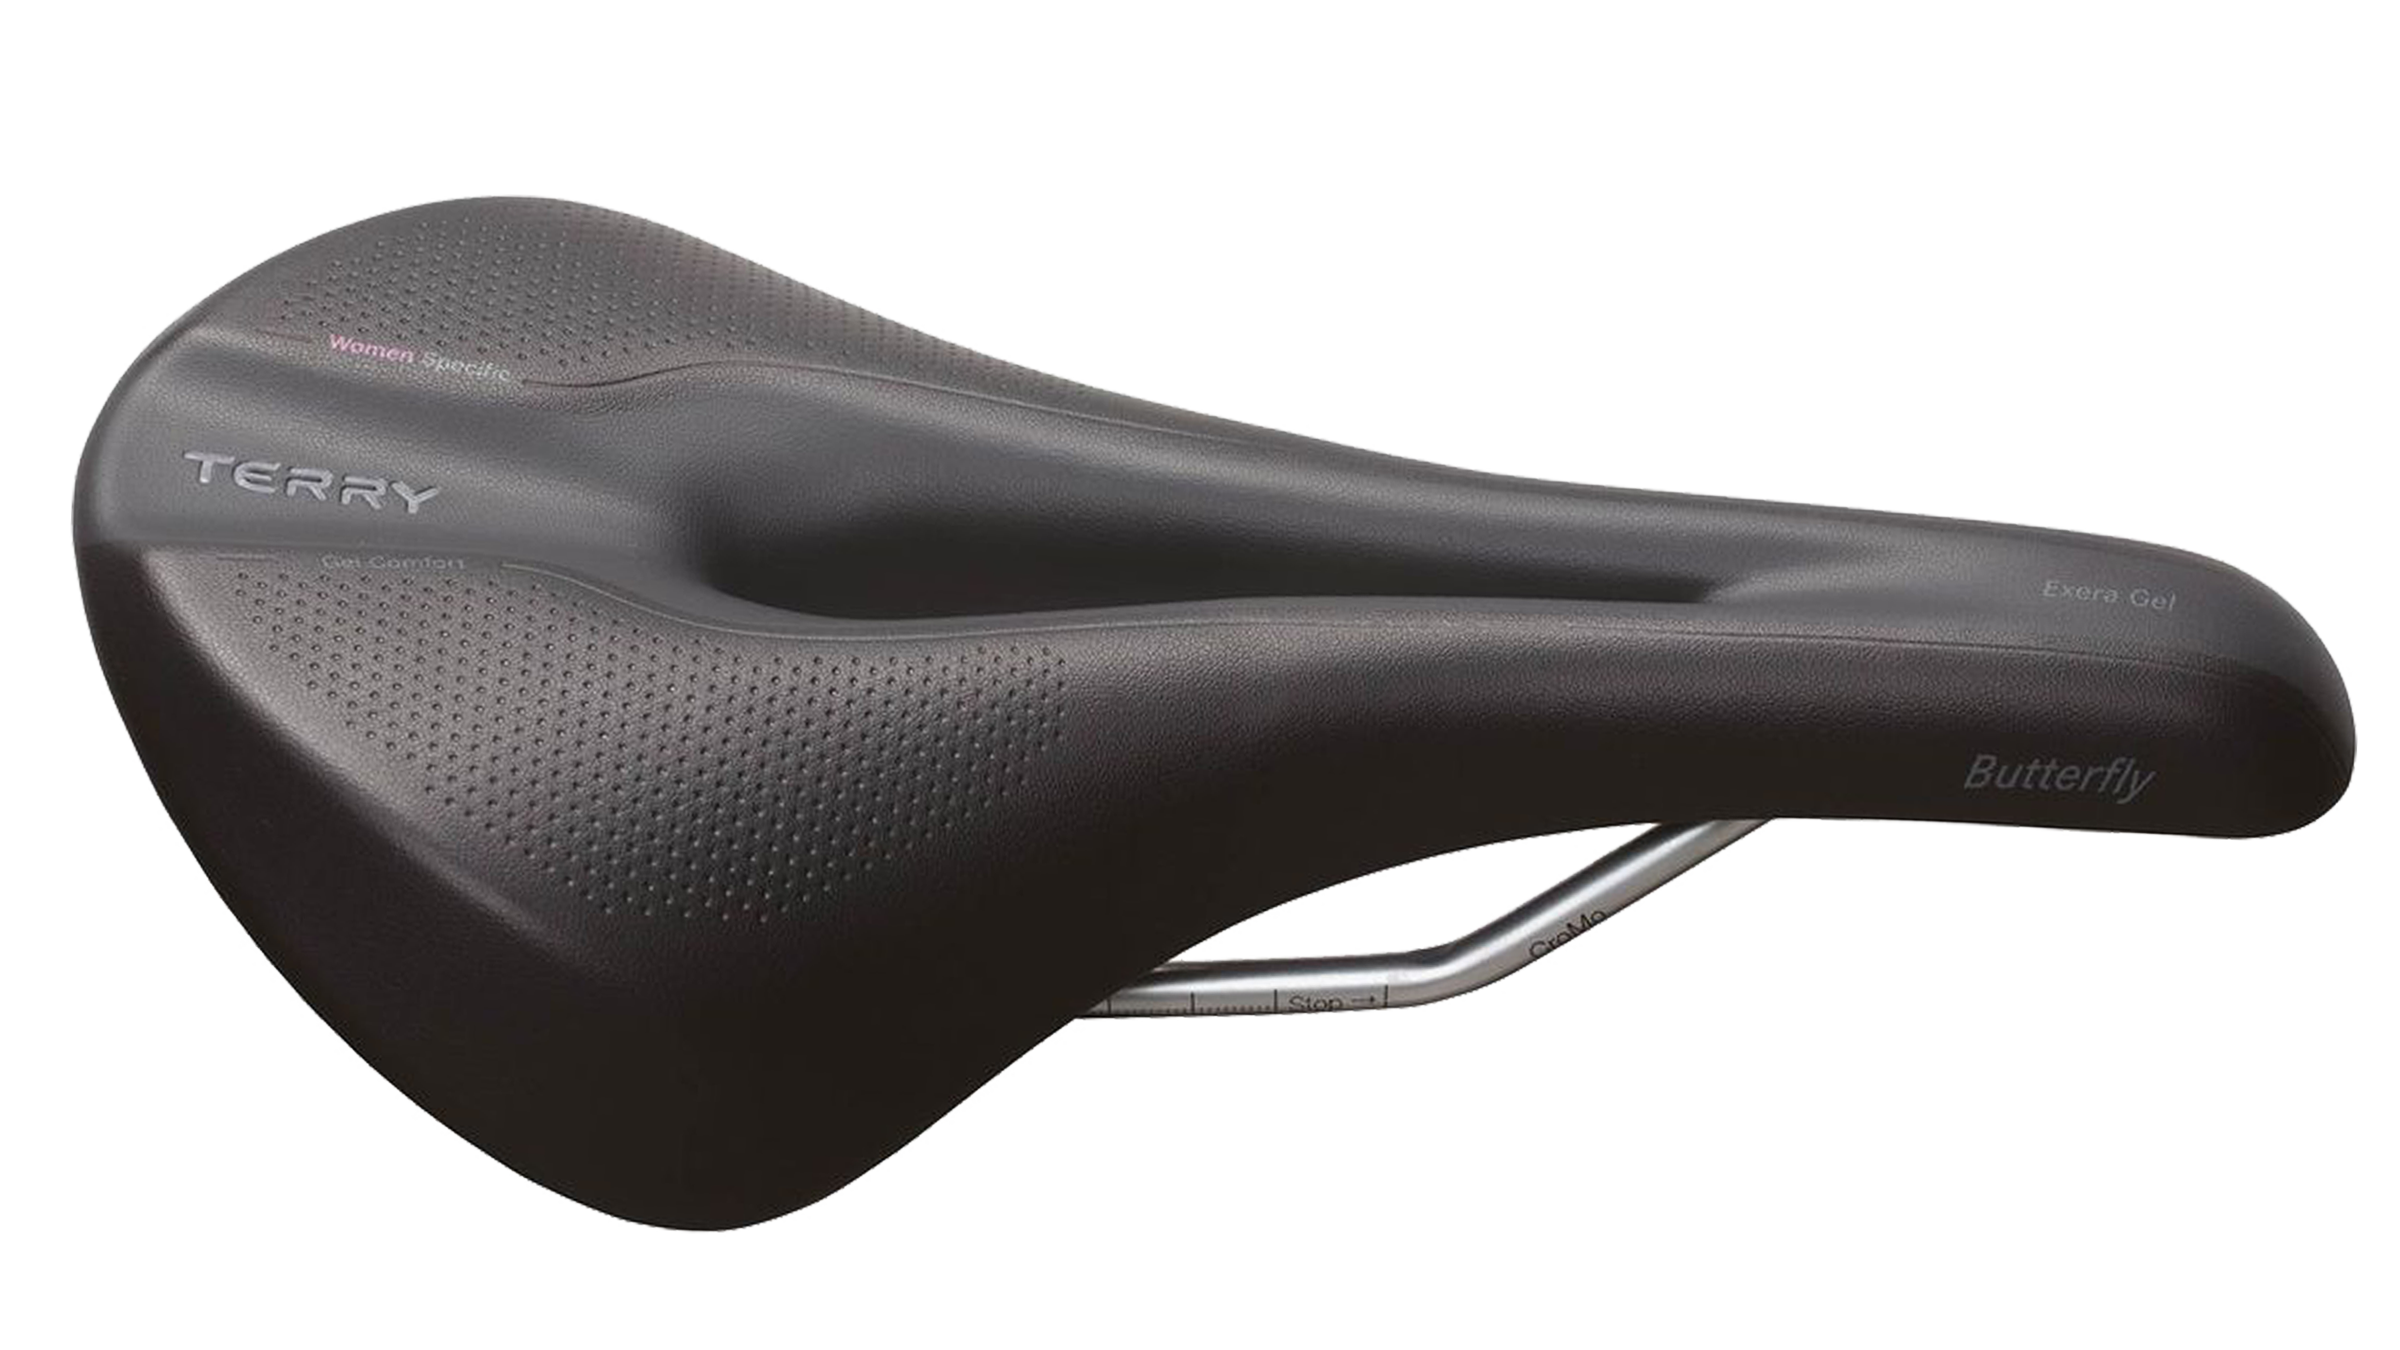 Terry Butterfly Exera Gel Women's Sport Comfort Saddle S | CANYON NL